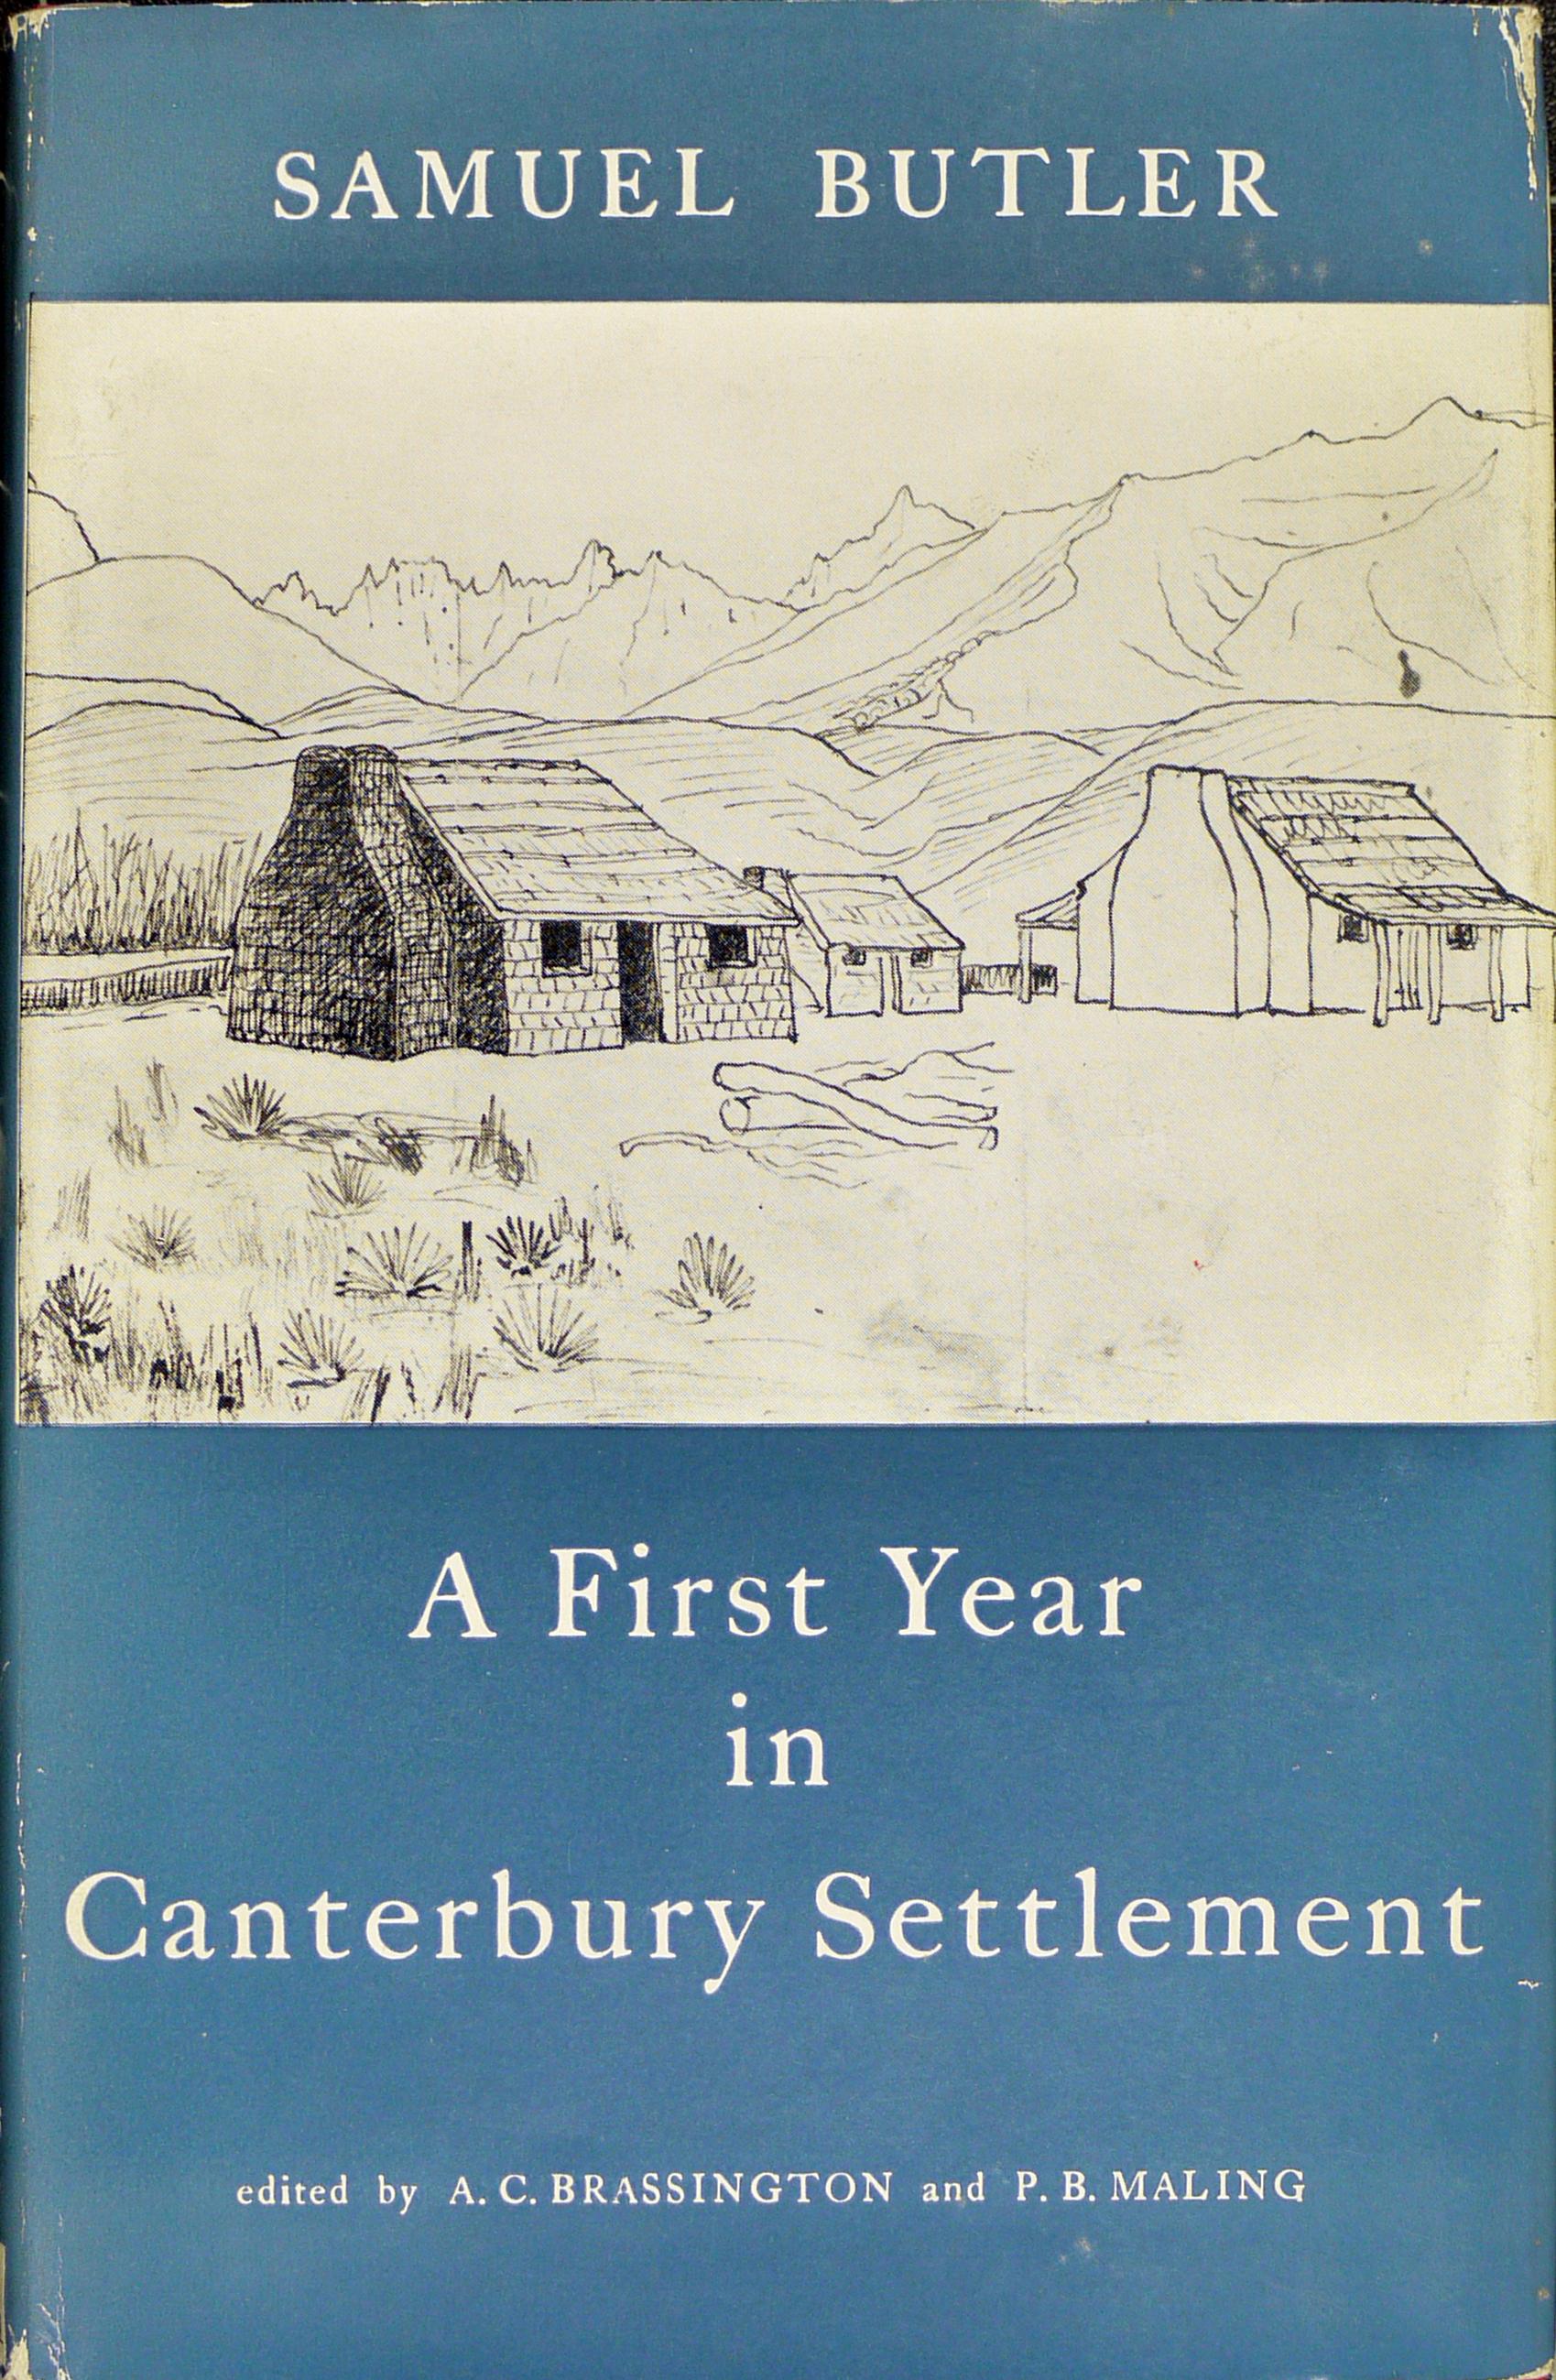 Cover of the 1964 edition